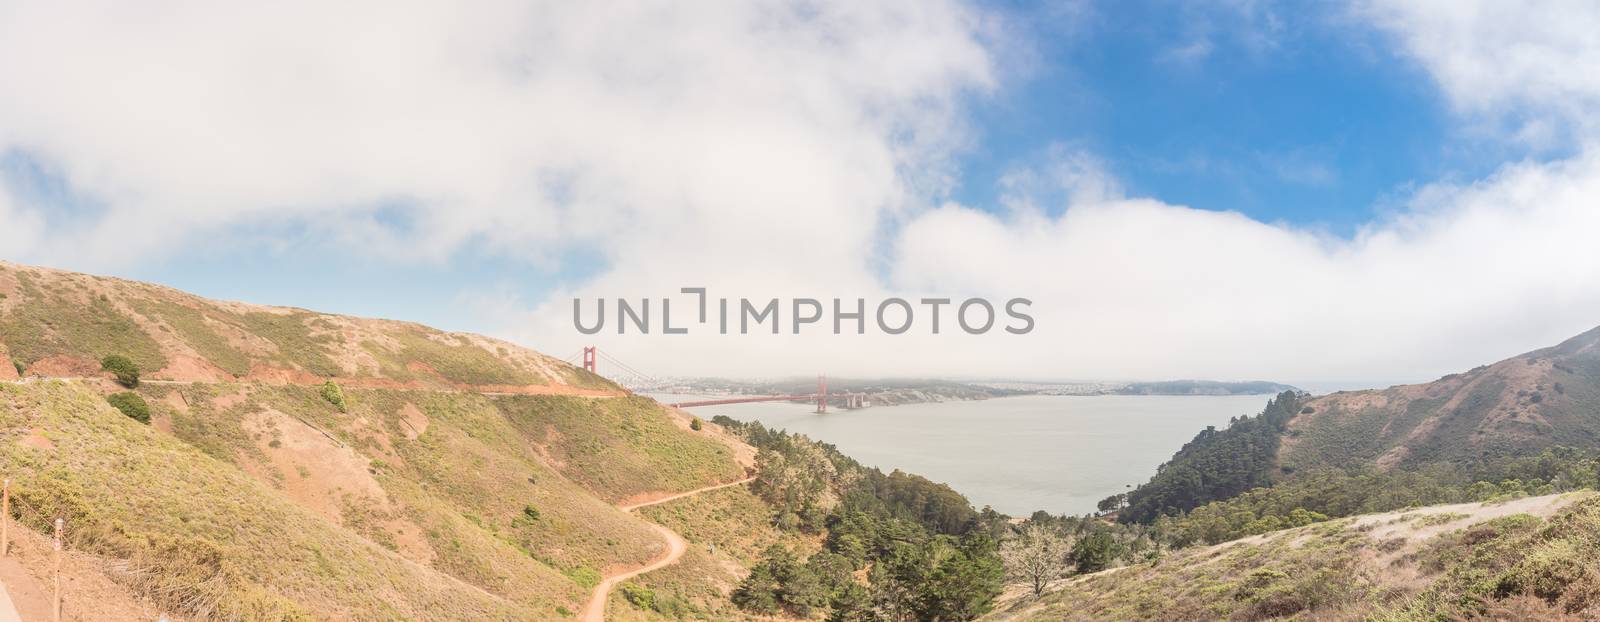 View from Golden Gate Observation Deck to the red bridge and downtown San Francisco in foggy summer day. Panorama ocean view near Hawk Hill with steep hillside road and open bay.